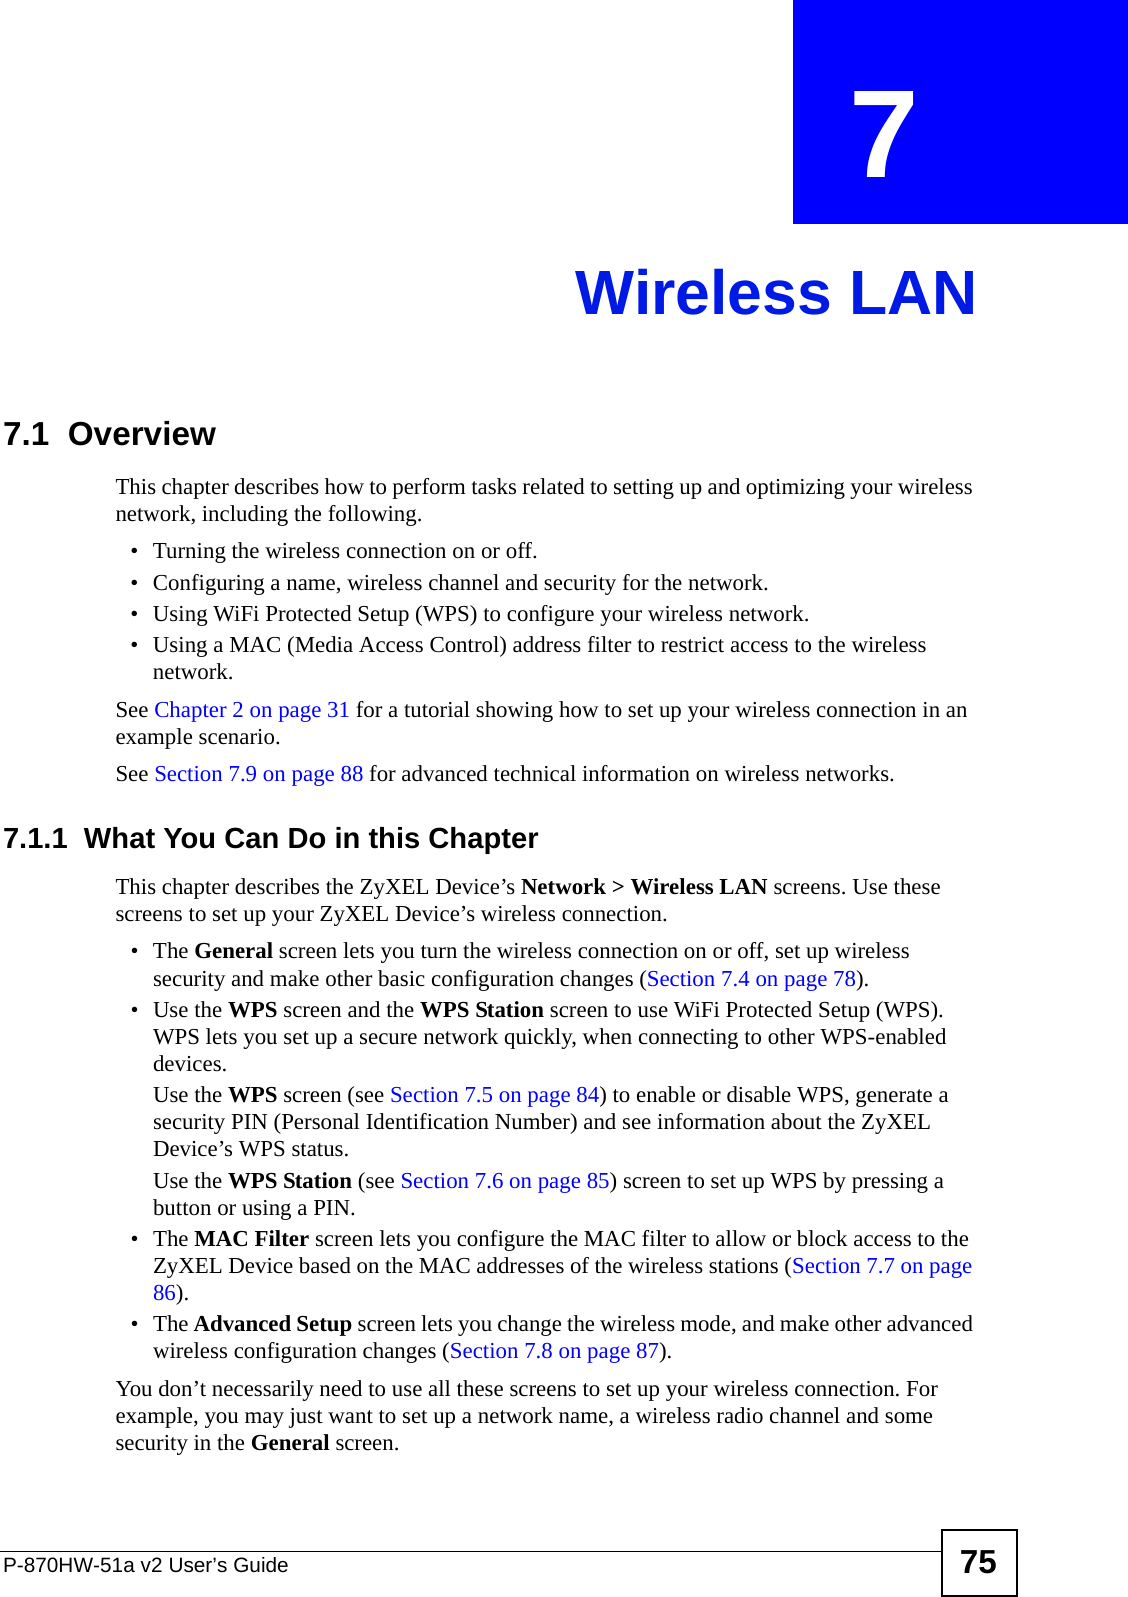 P-870HW-51a v2 User’s Guide 75CHAPTER  7 Wireless LAN7.1  Overview This chapter describes how to perform tasks related to setting up and optimizing your wireless network, including the following.• Turning the wireless connection on or off.• Configuring a name, wireless channel and security for the network.• Using WiFi Protected Setup (WPS) to configure your wireless network.• Using a MAC (Media Access Control) address filter to restrict access to the wireless network.See Chapter 2 on page 31 for a tutorial showing how to set up your wireless connection in an example scenario.See Section 7.9 on page 88 for advanced technical information on wireless networks.7.1.1  What You Can Do in this ChapterThis chapter describes the ZyXEL Device’s Network &gt; Wireless LAN screens. Use these screens to set up your ZyXEL Device’s wireless connection.•The General screen lets you turn the wireless connection on or off, set up wireless security and make other basic configuration changes (Section 7.4 on page 78).• Use the WPS screen and the WPS Station screen to use WiFi Protected Setup (WPS). WPS lets you set up a secure network quickly, when connecting to other WPS-enabled devices. Use the WPS screen (see Section 7.5 on page 84) to enable or disable WPS, generate a security PIN (Personal Identification Number) and see information about the ZyXEL Device’s WPS status.Use the WPS Station (see Section 7.6 on page 85) screen to set up WPS by pressing a button or using a PIN.•The MAC Filter screen lets you configure the MAC filter to allow or block access to the ZyXEL Device based on the MAC addresses of the wireless stations (Section 7.7 on page 86).•The Advanced Setup screen lets you change the wireless mode, and make other advanced wireless configuration changes (Section 7.8 on page 87).You don’t necessarily need to use all these screens to set up your wireless connection. For example, you may just want to set up a network name, a wireless radio channel and some security in the General screen.